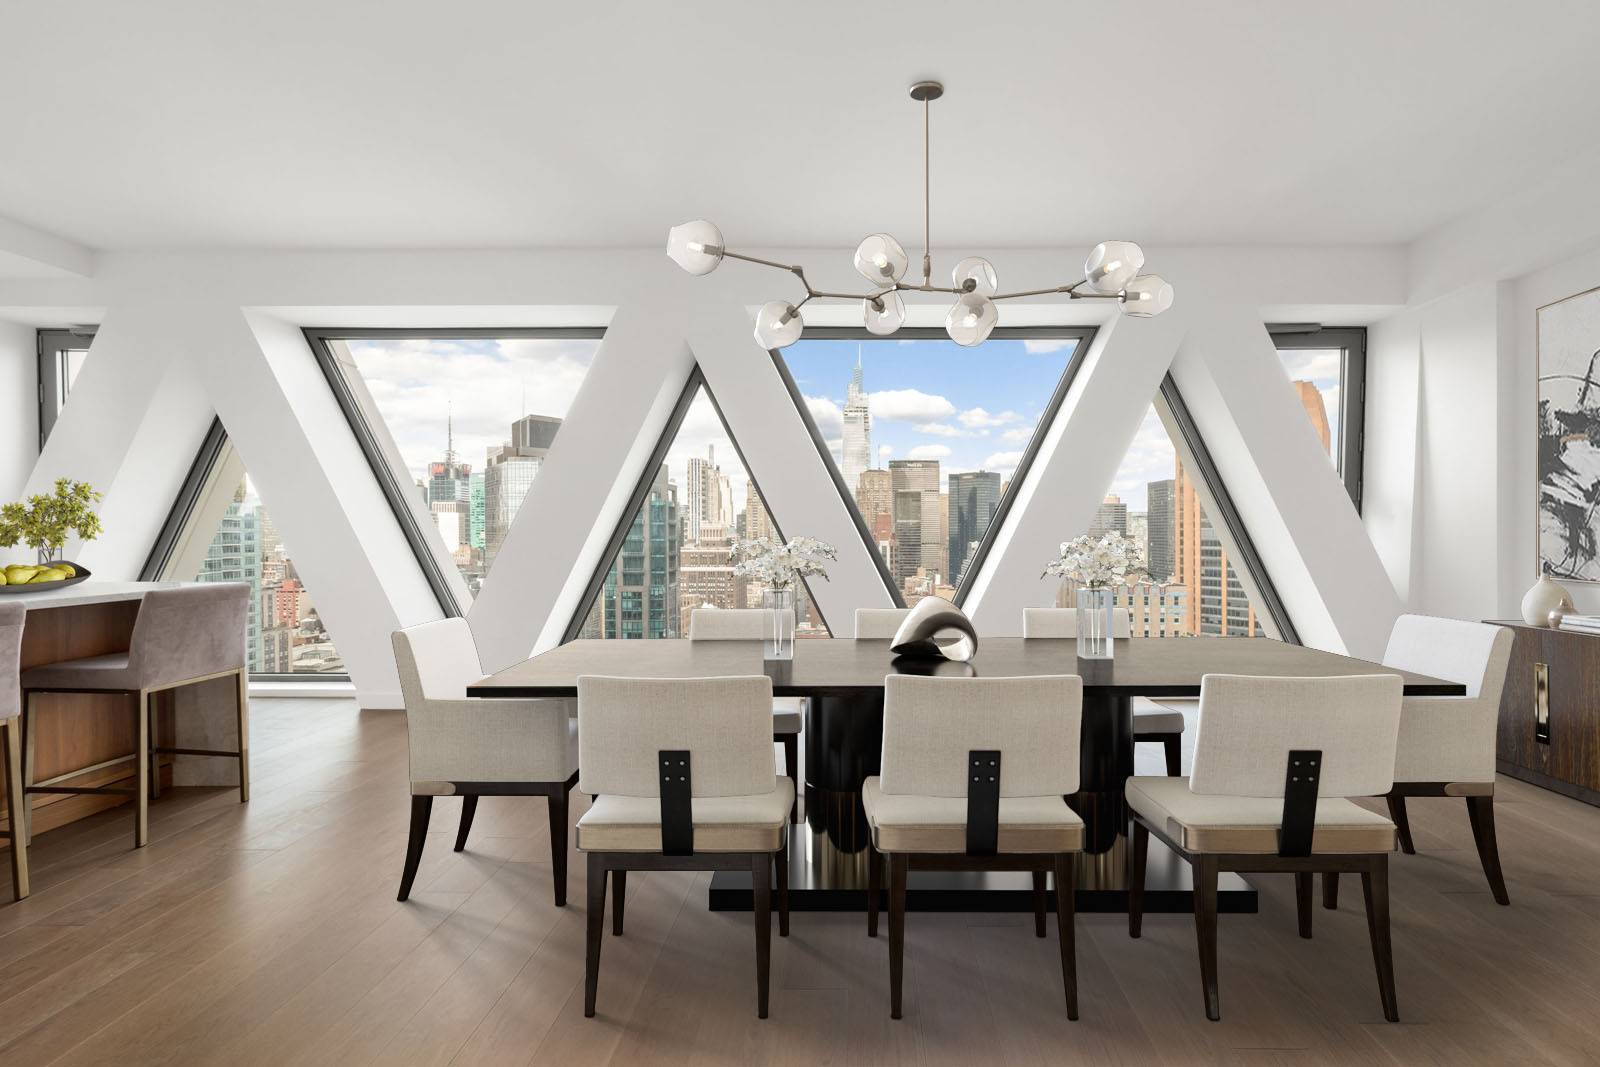 A blend of crisp, contemporary form with carefully considered function, the penthouse at 30 East 31st Street represents the pinnacle of quintessential Manhattan living.